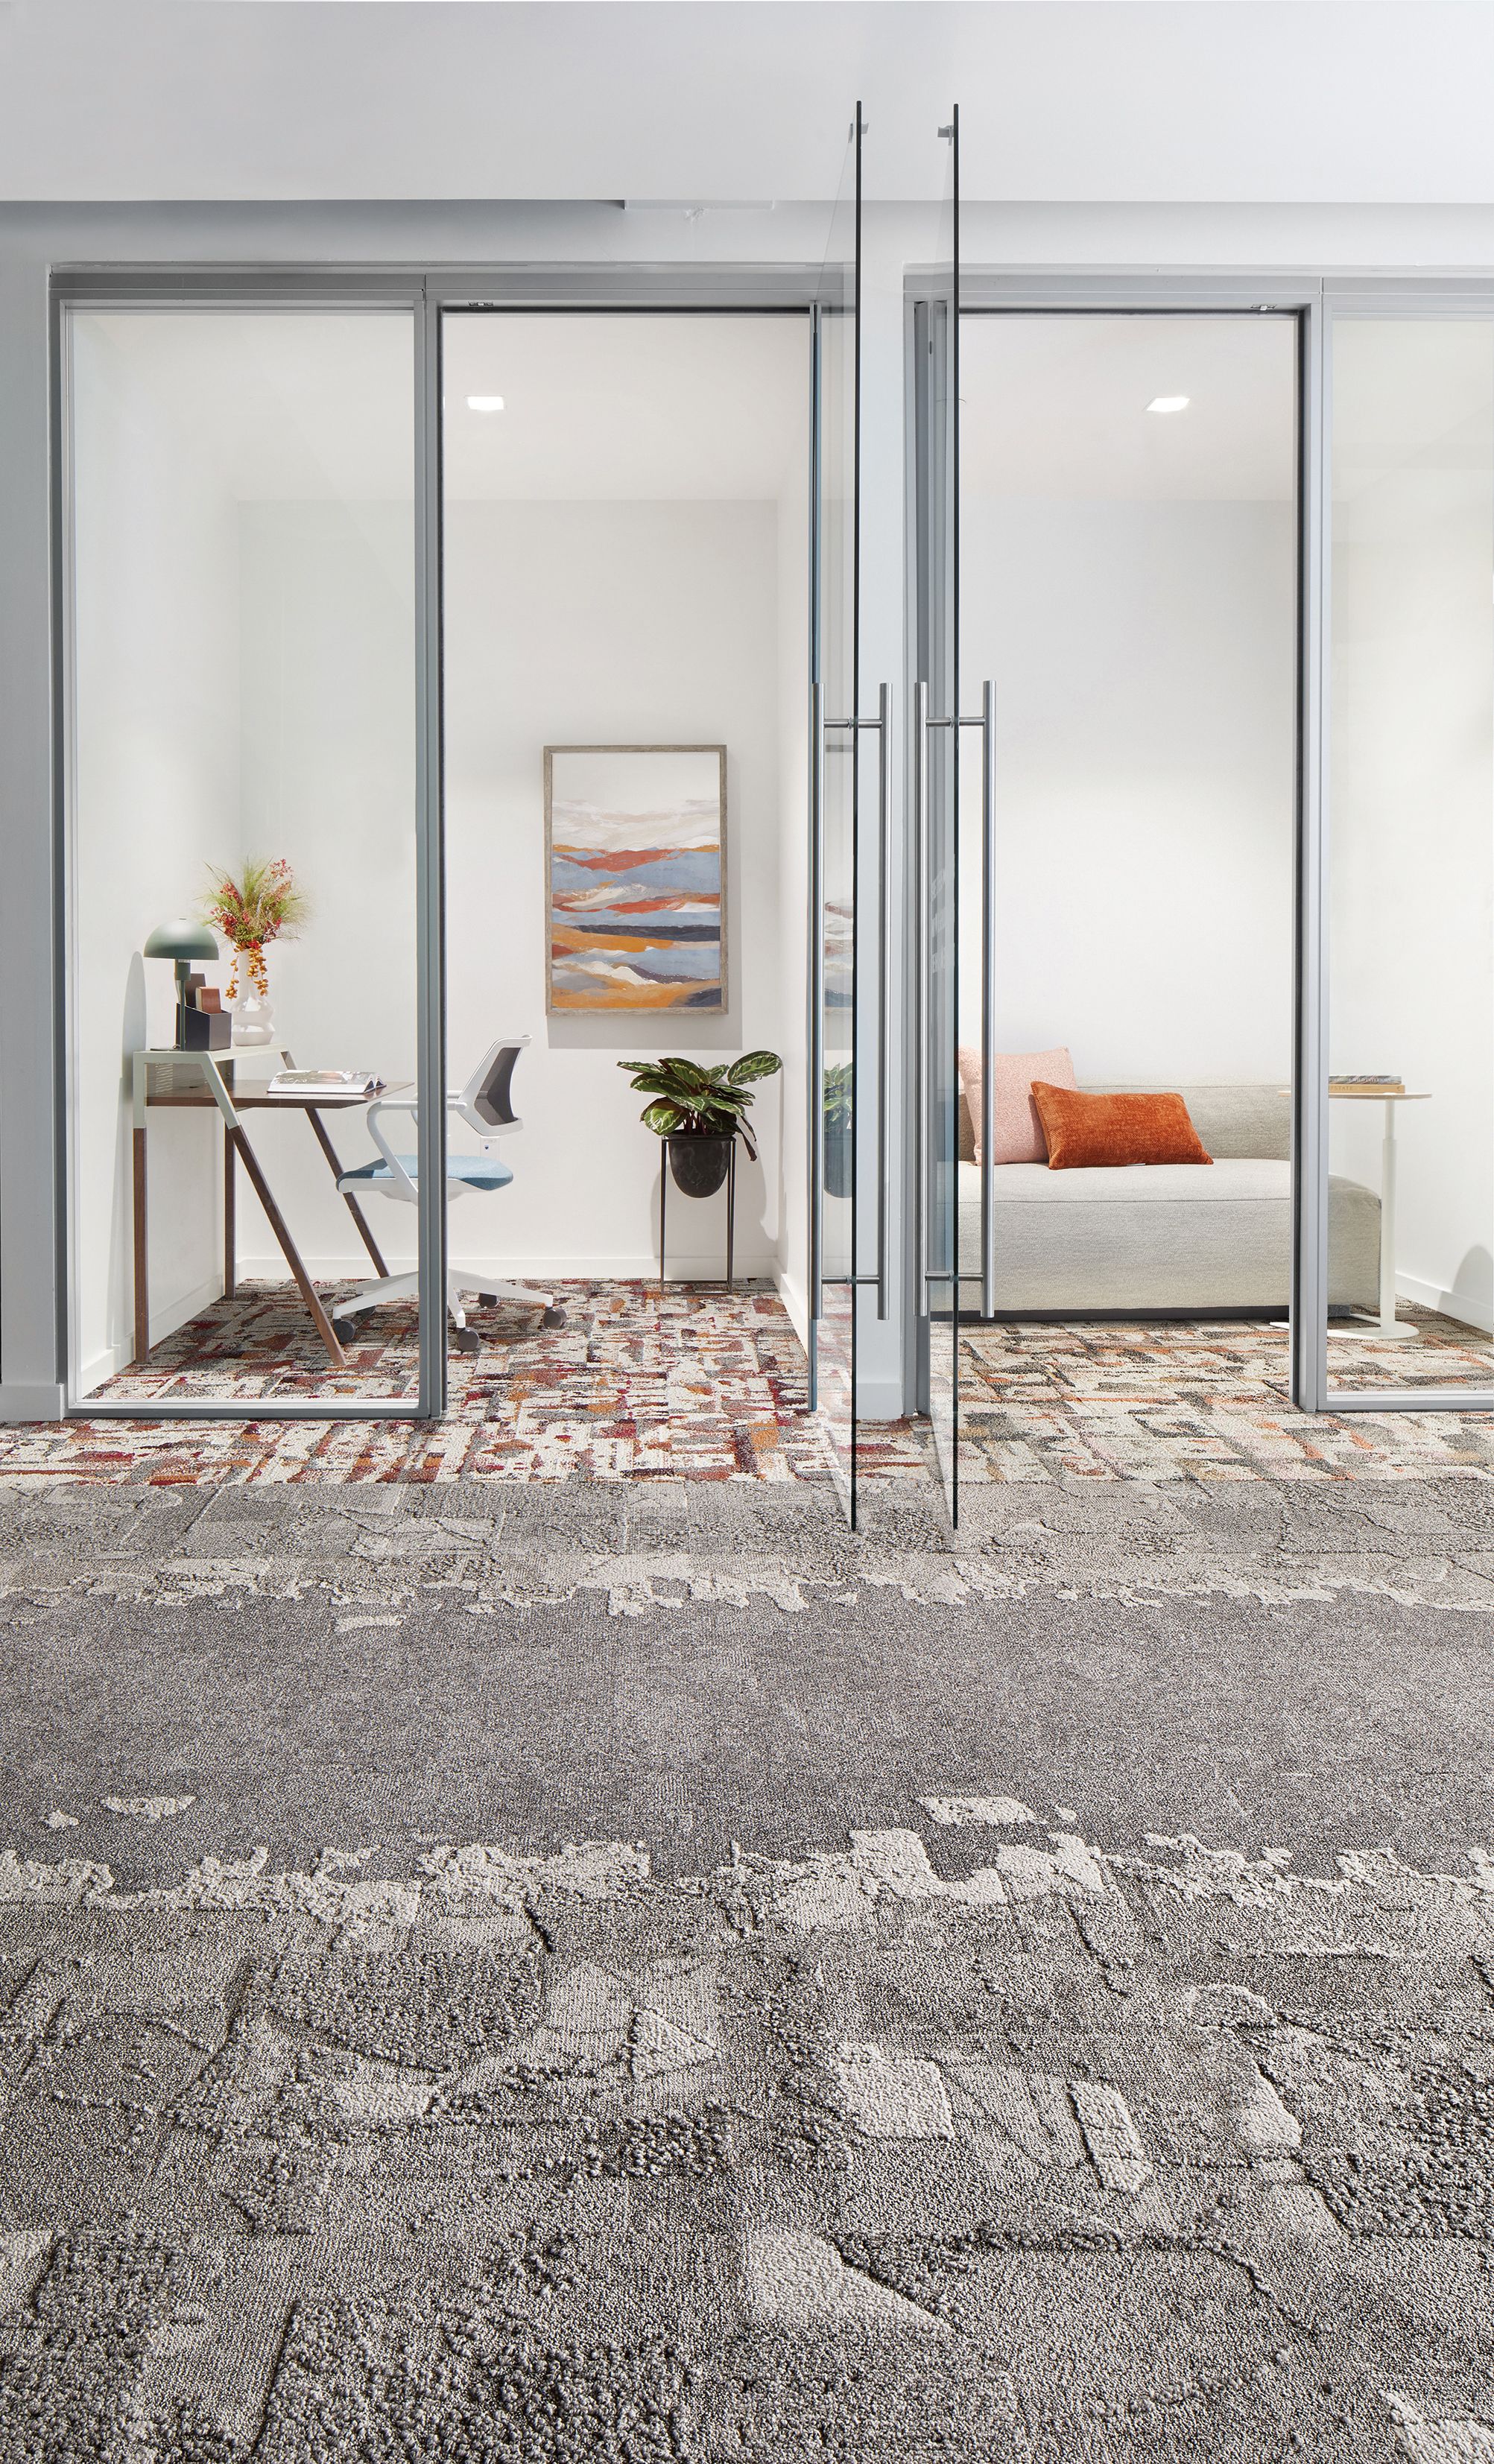 Interface Bridge Creek, Mountain Rock, Flat Rock and Panola Mountain carpet tile in office with glass-enclosed meeting spaces numéro d’image 5